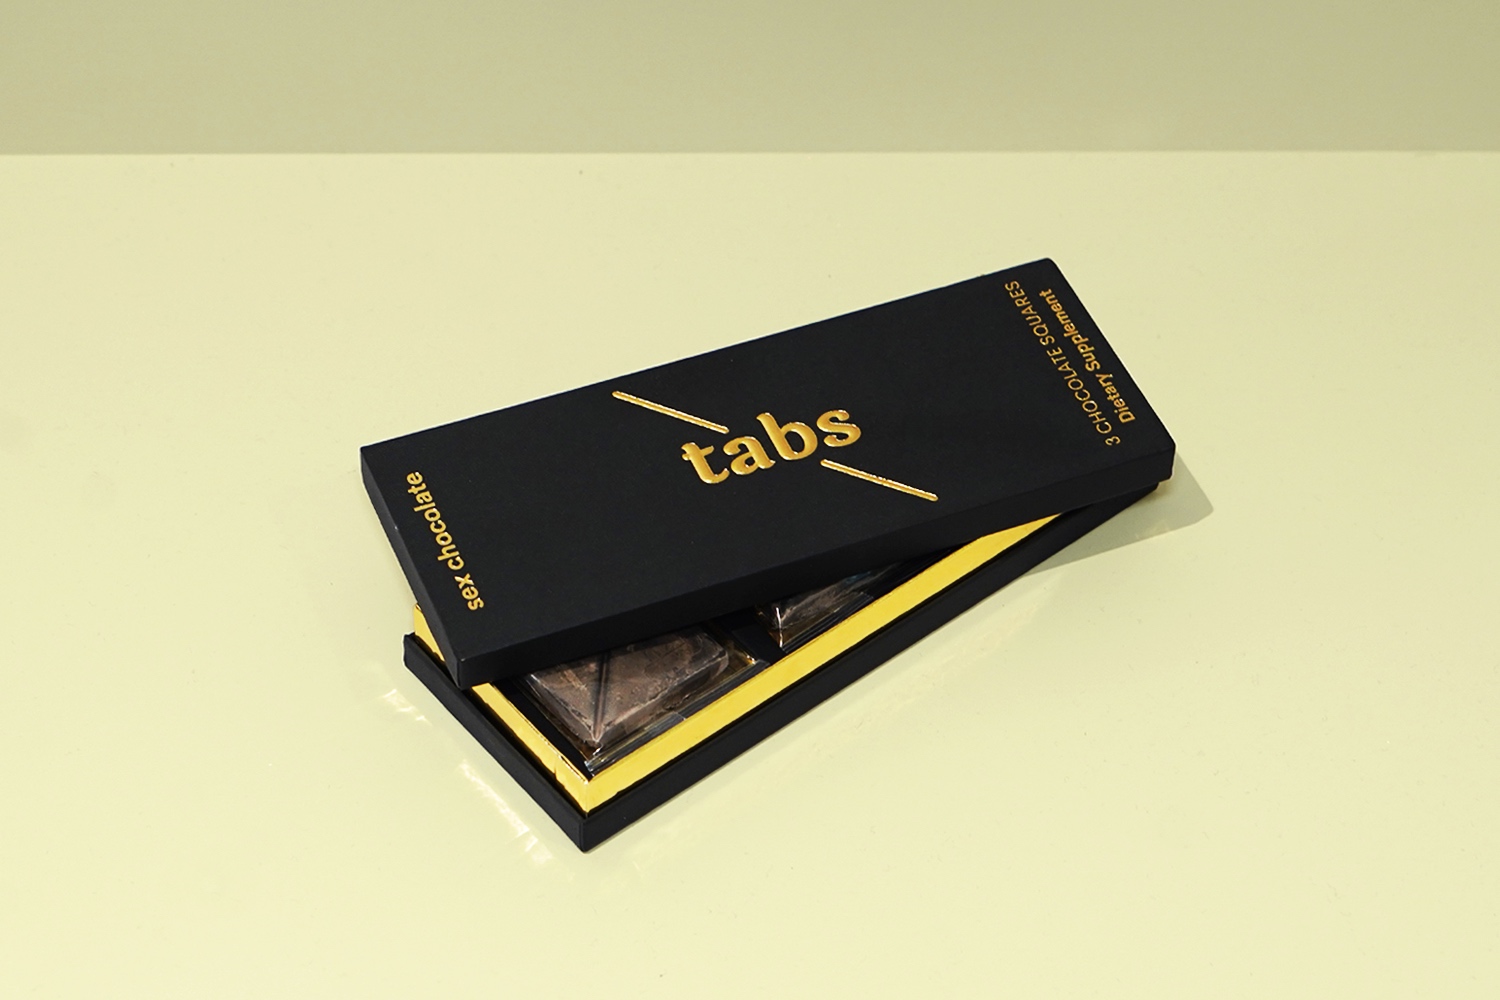 Tabs Chocolate Review - In-Depth Review of Tabs Chocolate